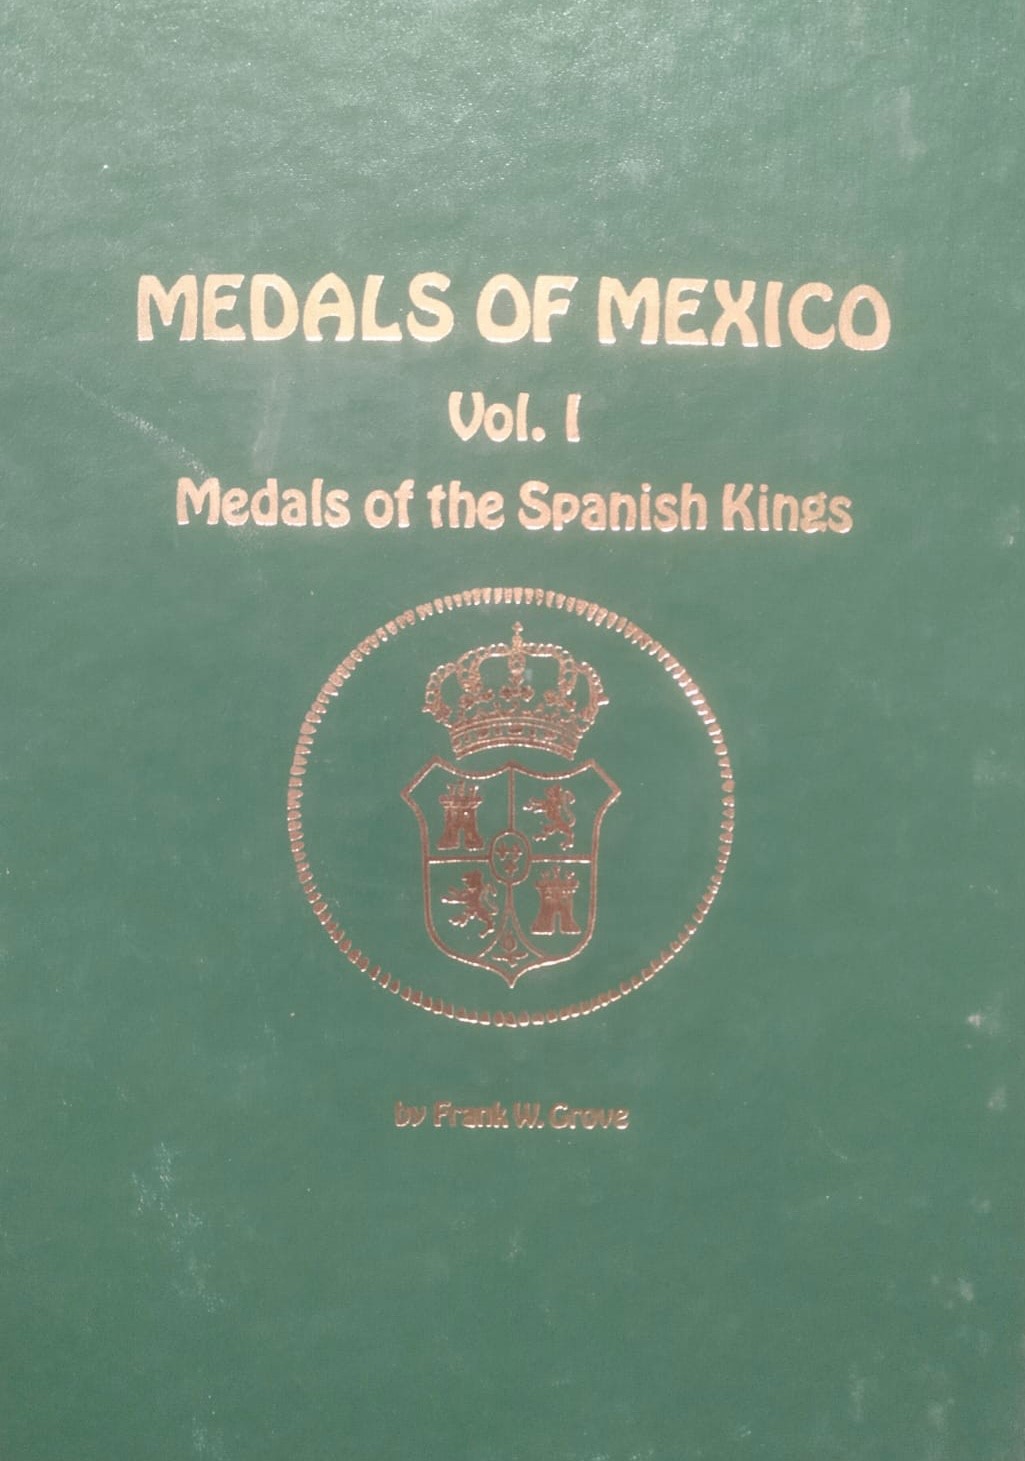 Medals of México. Volumen I Medals of the Spanish Kings  